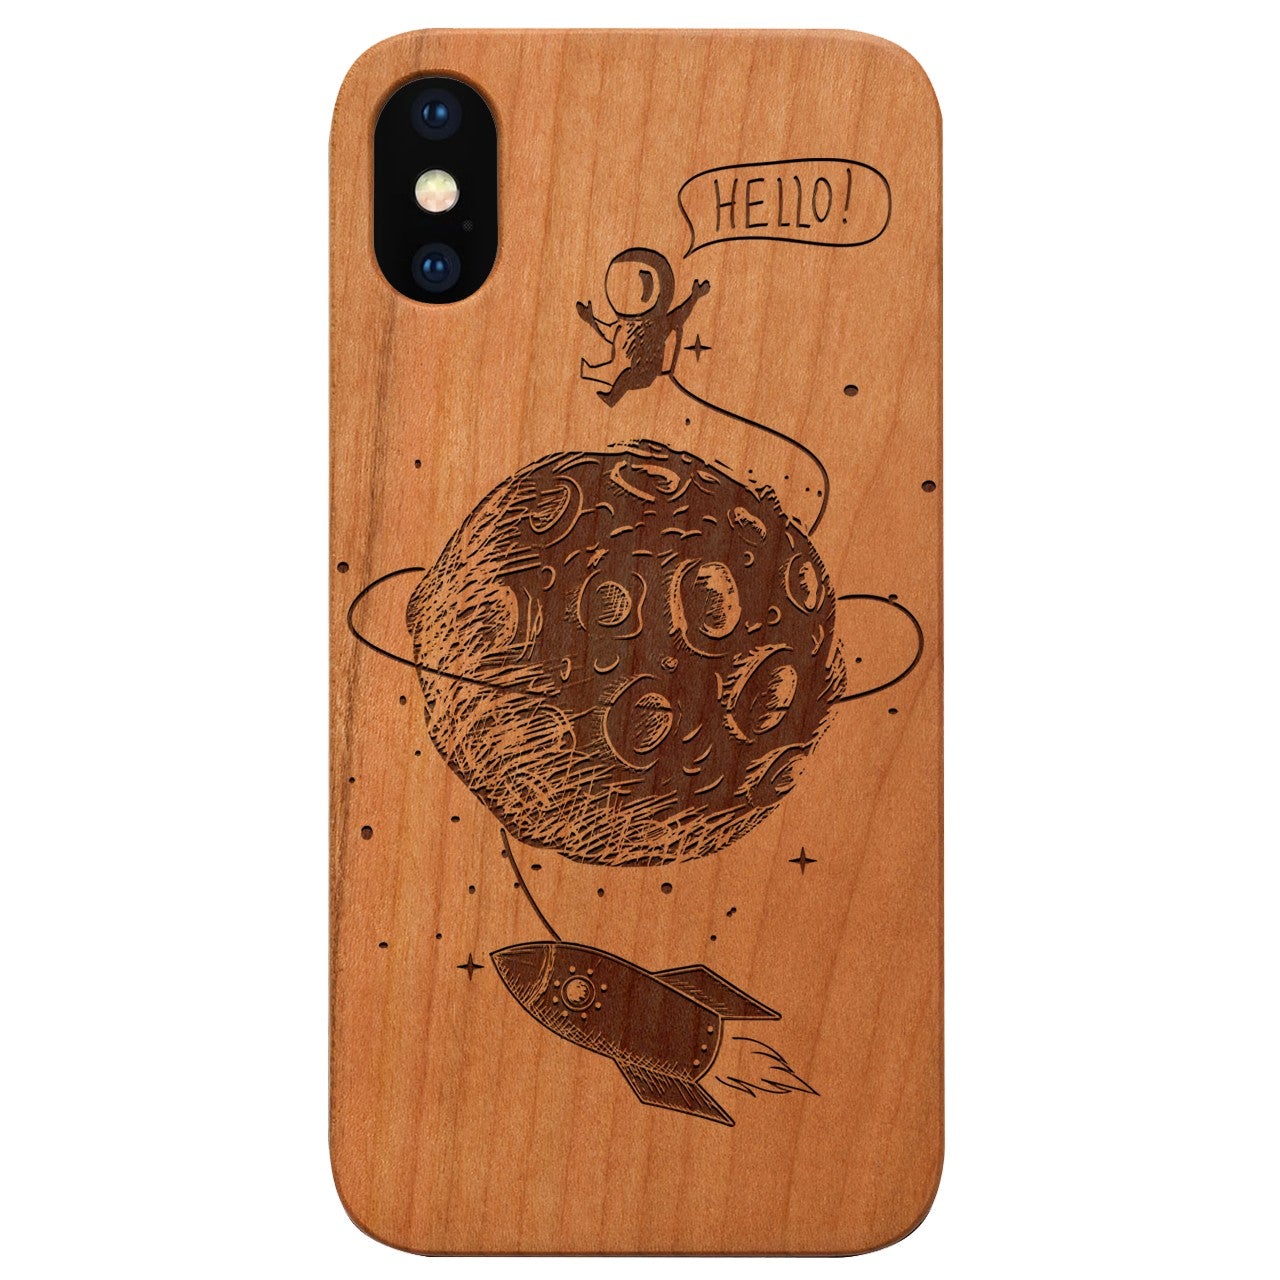  Astronaut in the Moon - Engraved - Wooden Phone Case - IPhone 13 Models